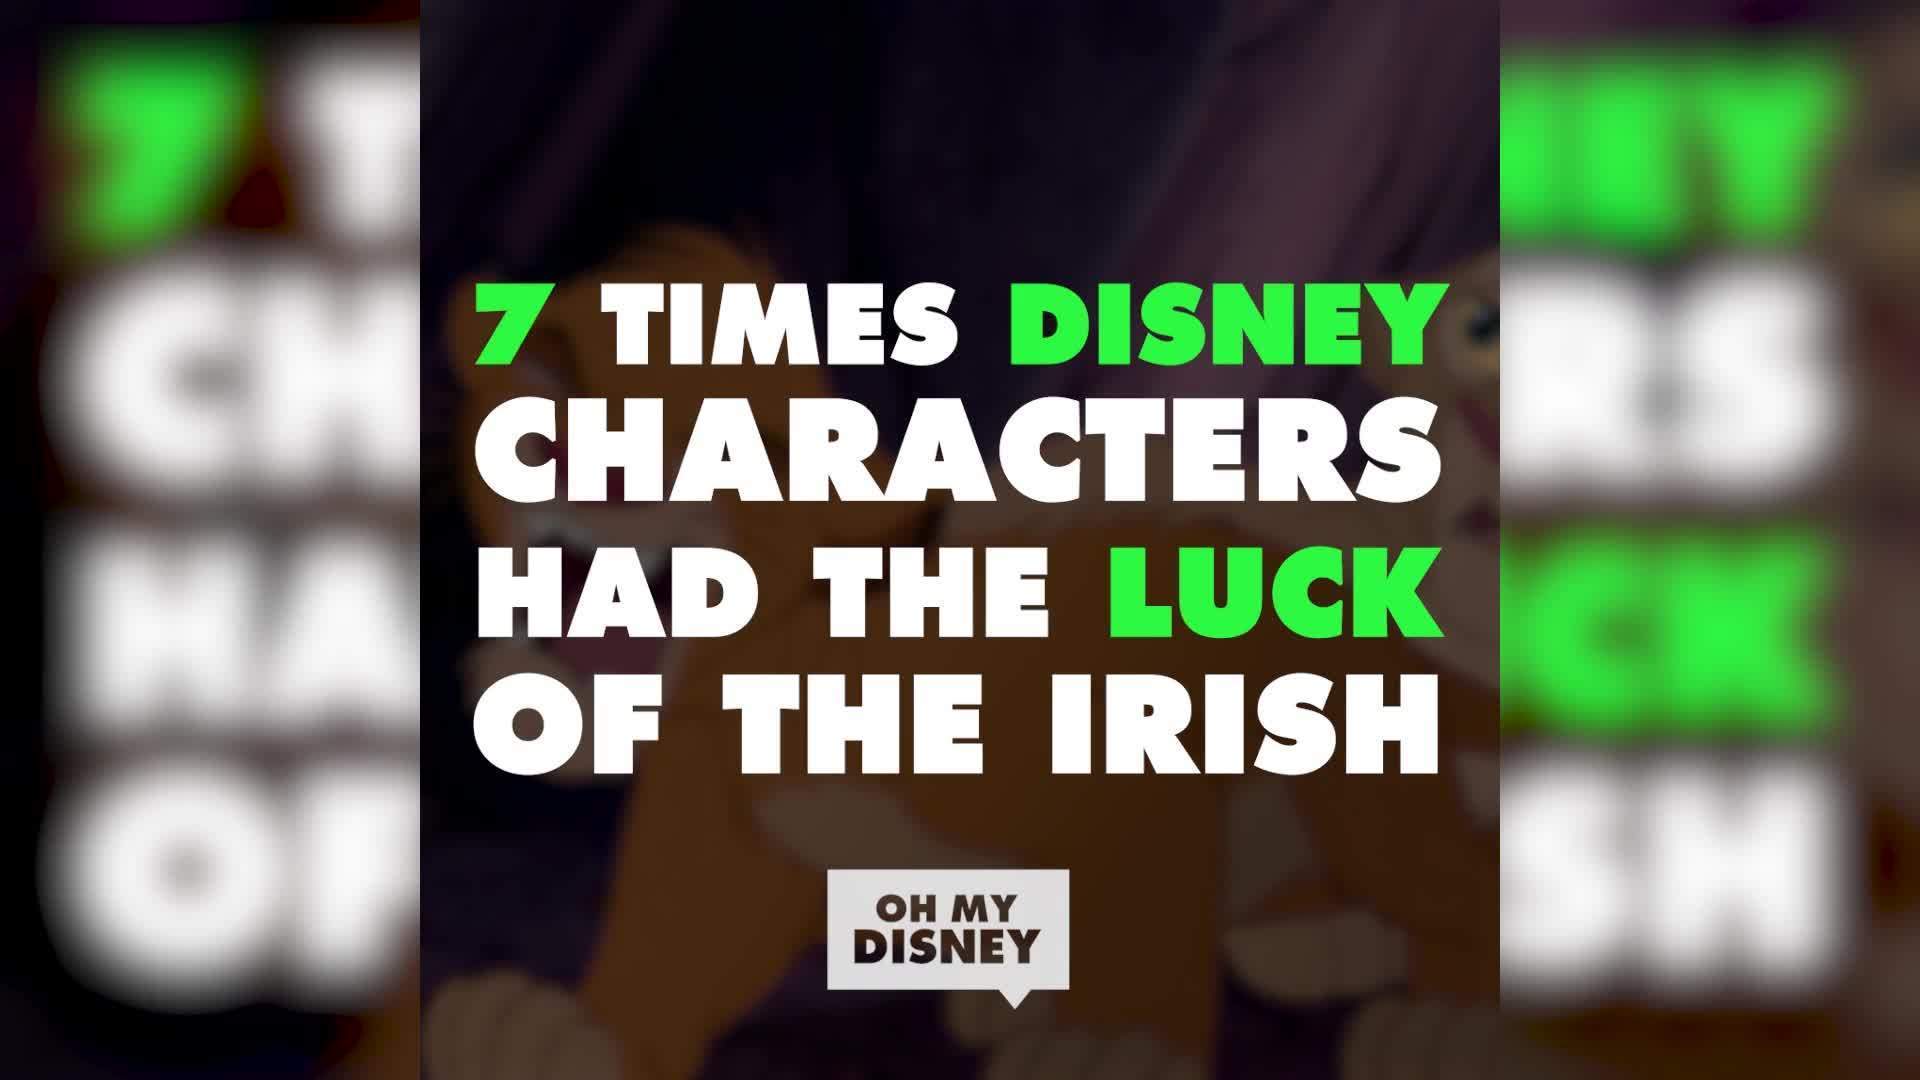 7 Times Disney Characters Had the Luck of the Irish | ListVids by Oh My Disney